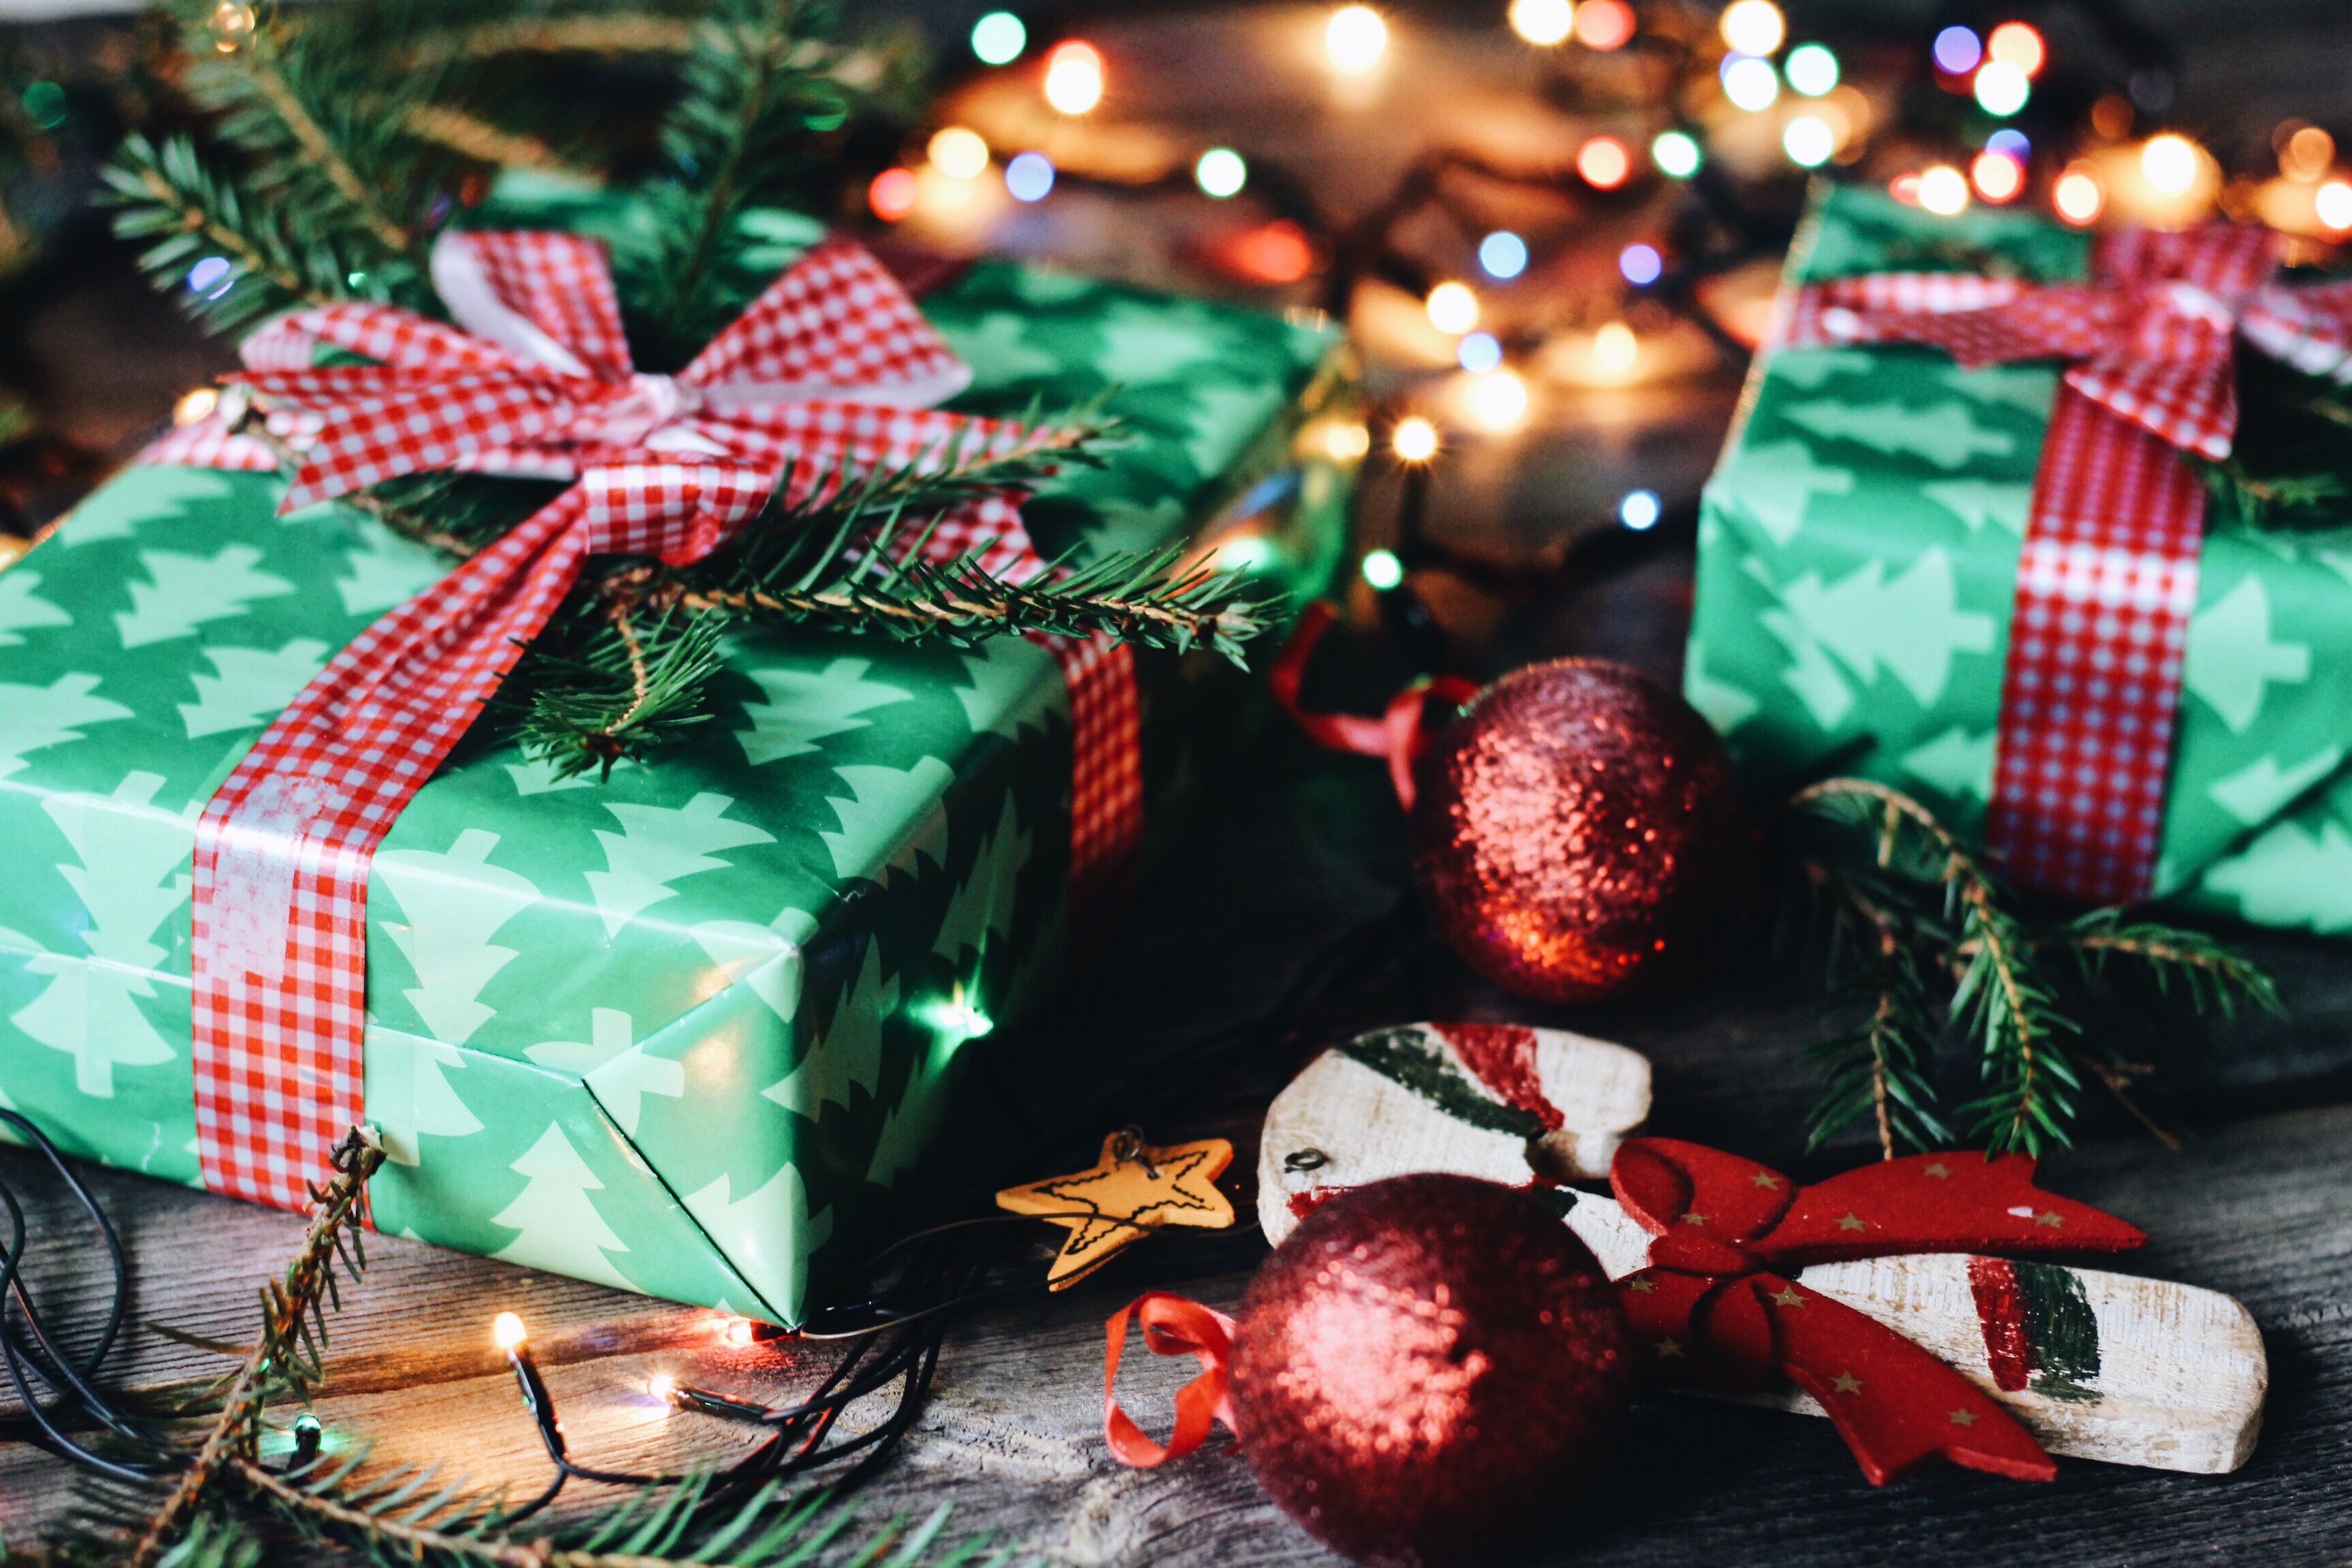 Tips for Holiday Gifts for Seniors - Eldercare Answers